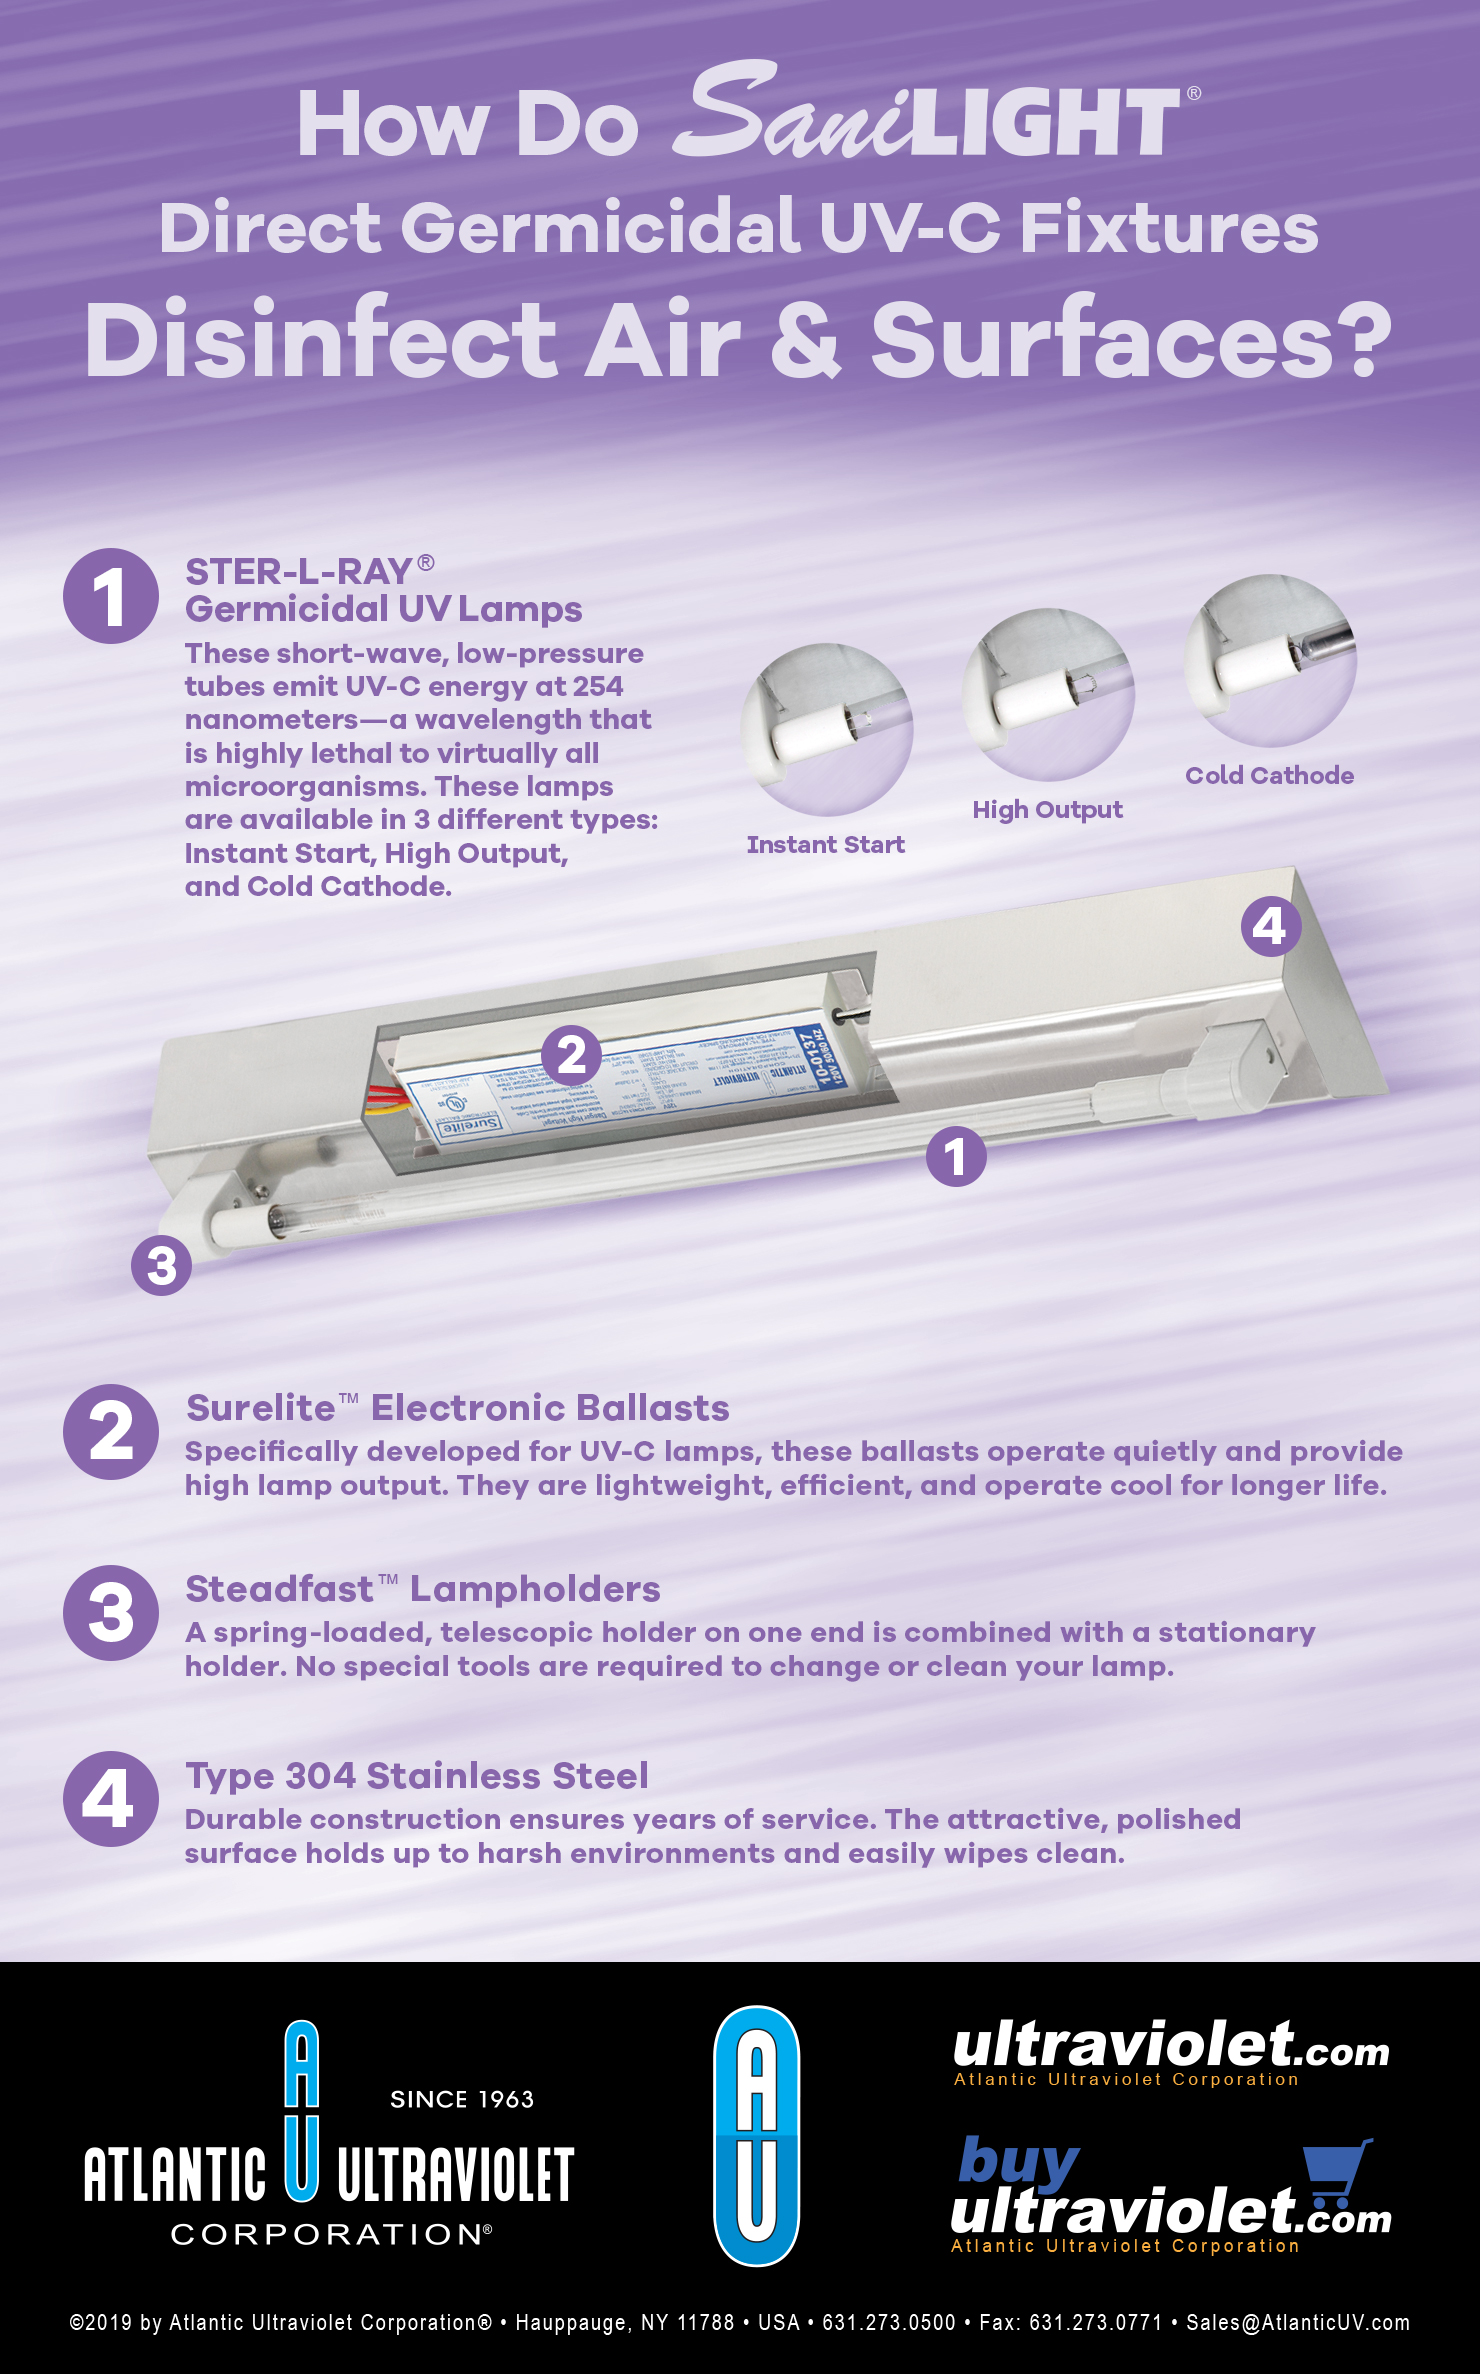 How Do SaniLIGHT® Direct Germicidal UV-C Fixtures Disinfect Air & Surfaces? - Infographic